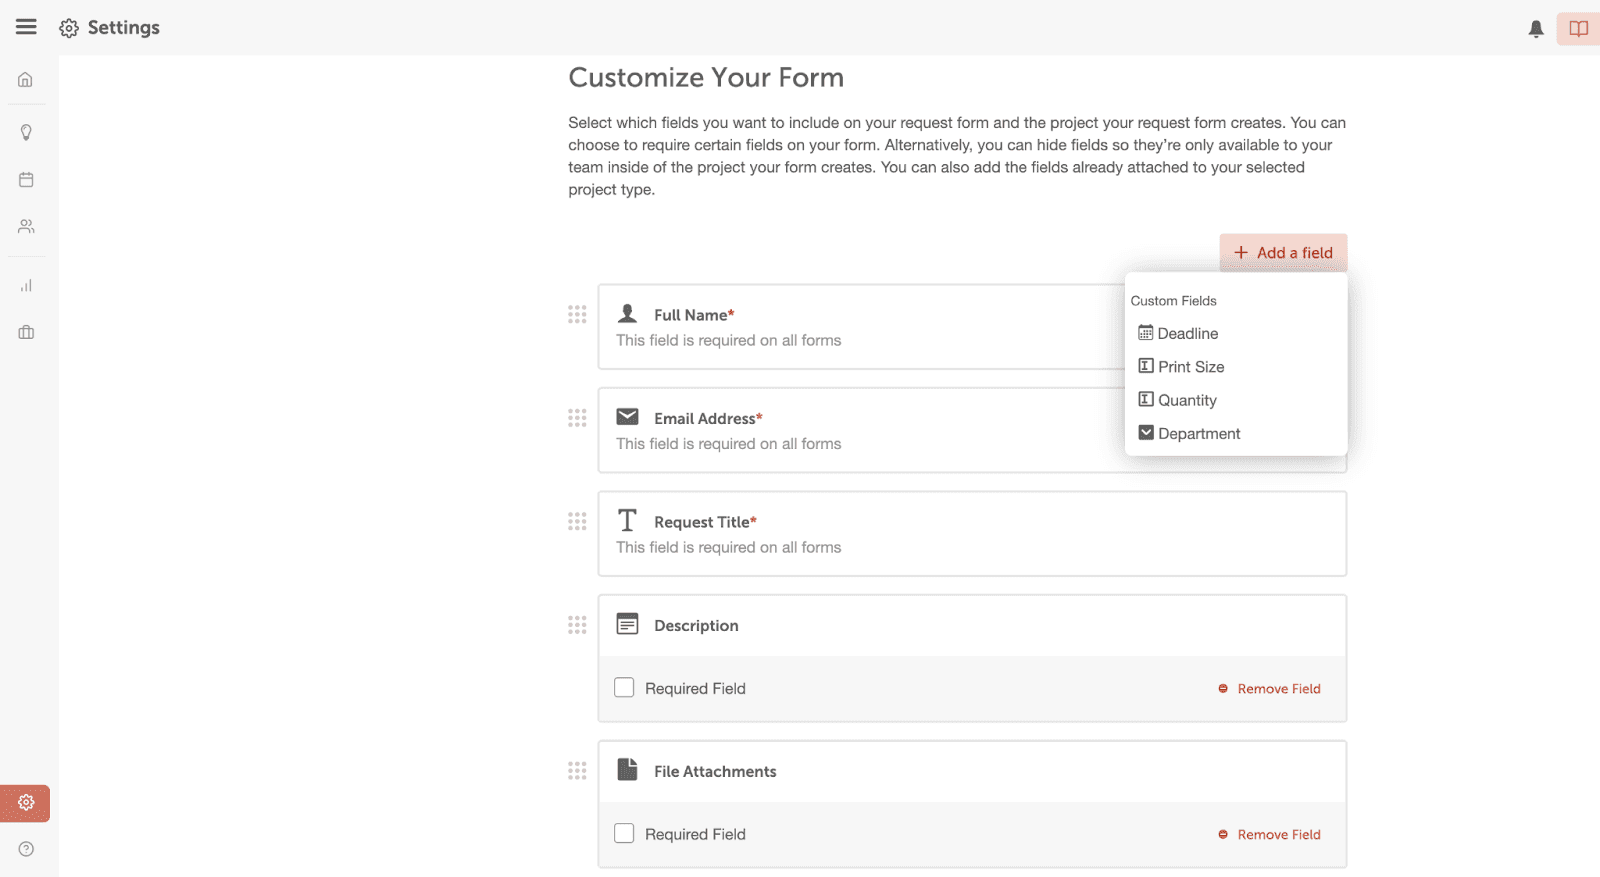 Tutorial on how to customize your request form by adding things like your name and email address.